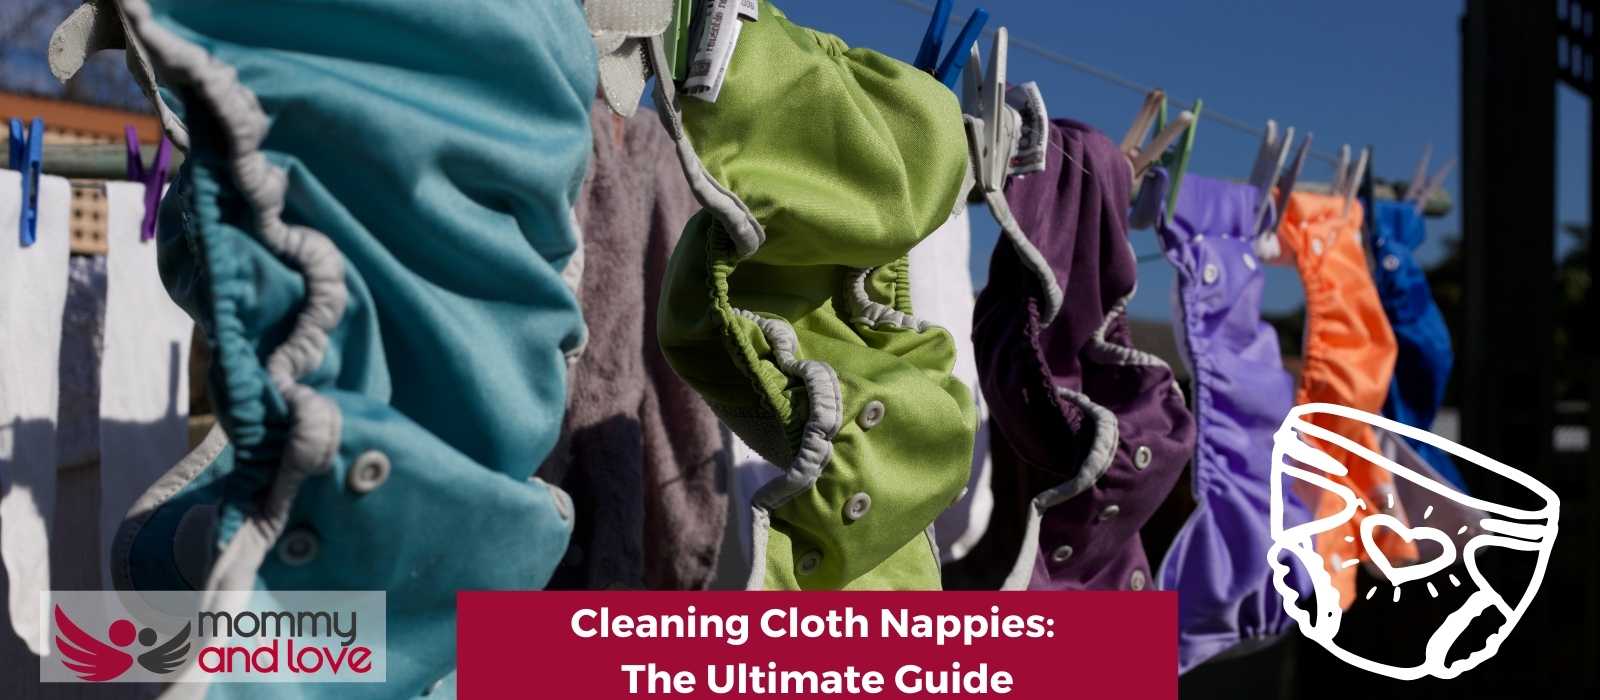 Cleaning Cloth Nappies The Ultimate Guide